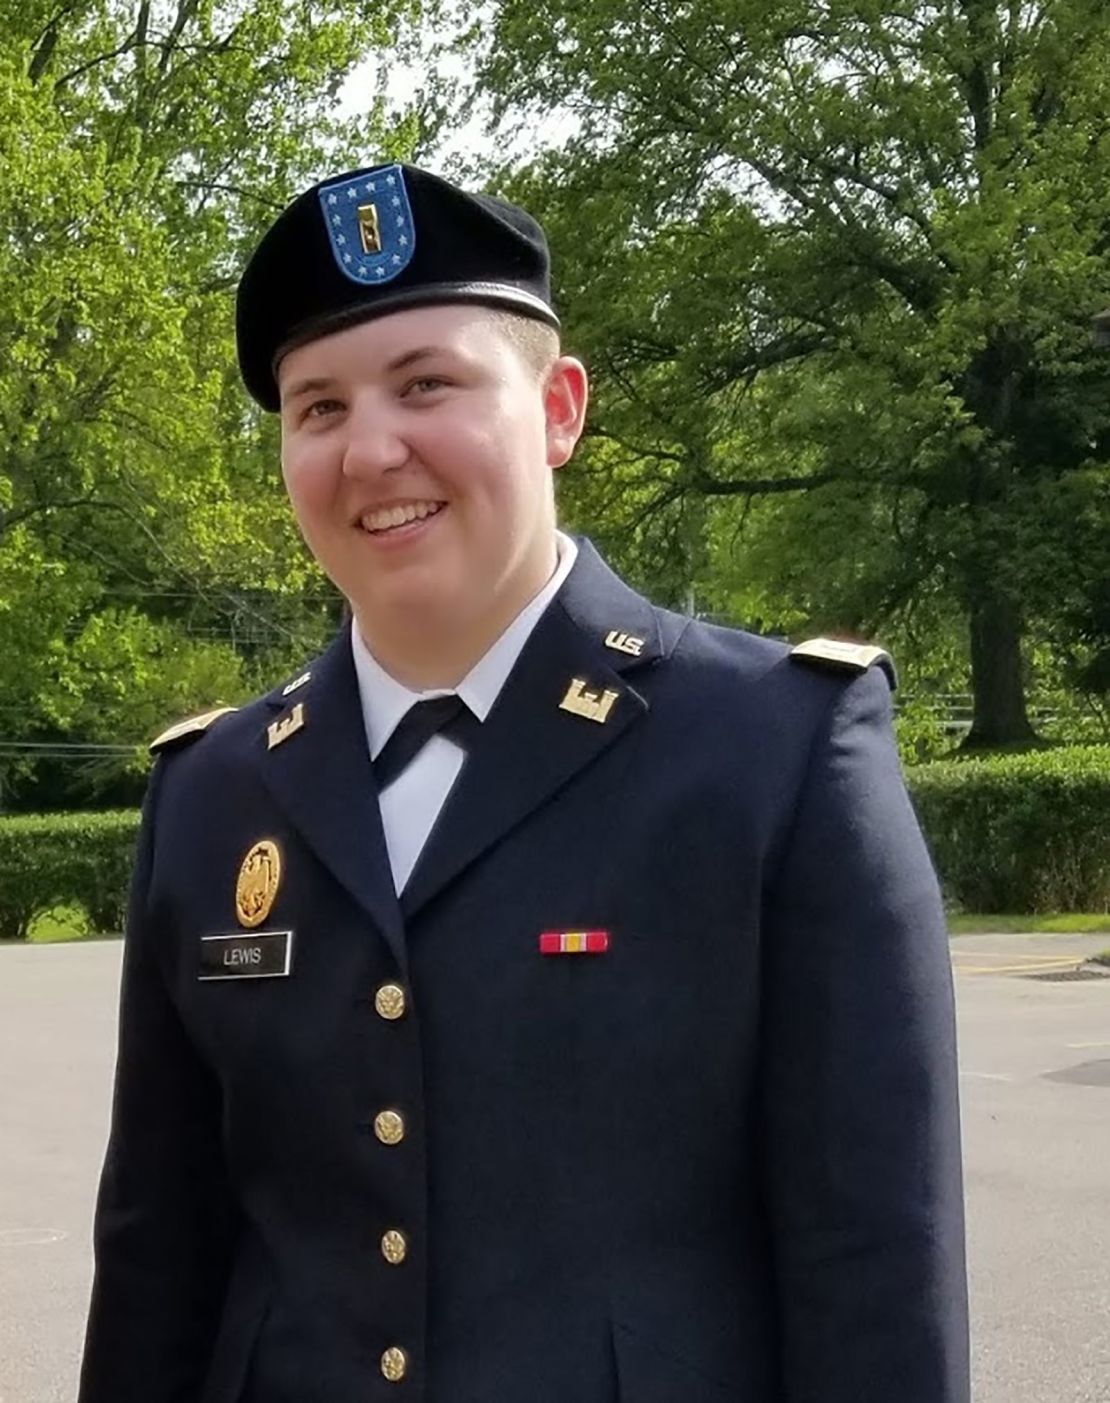 With the transgender ban repealed, Kazper Lewis can now begin the transition process, beginning with changing his gender marker in the Army.